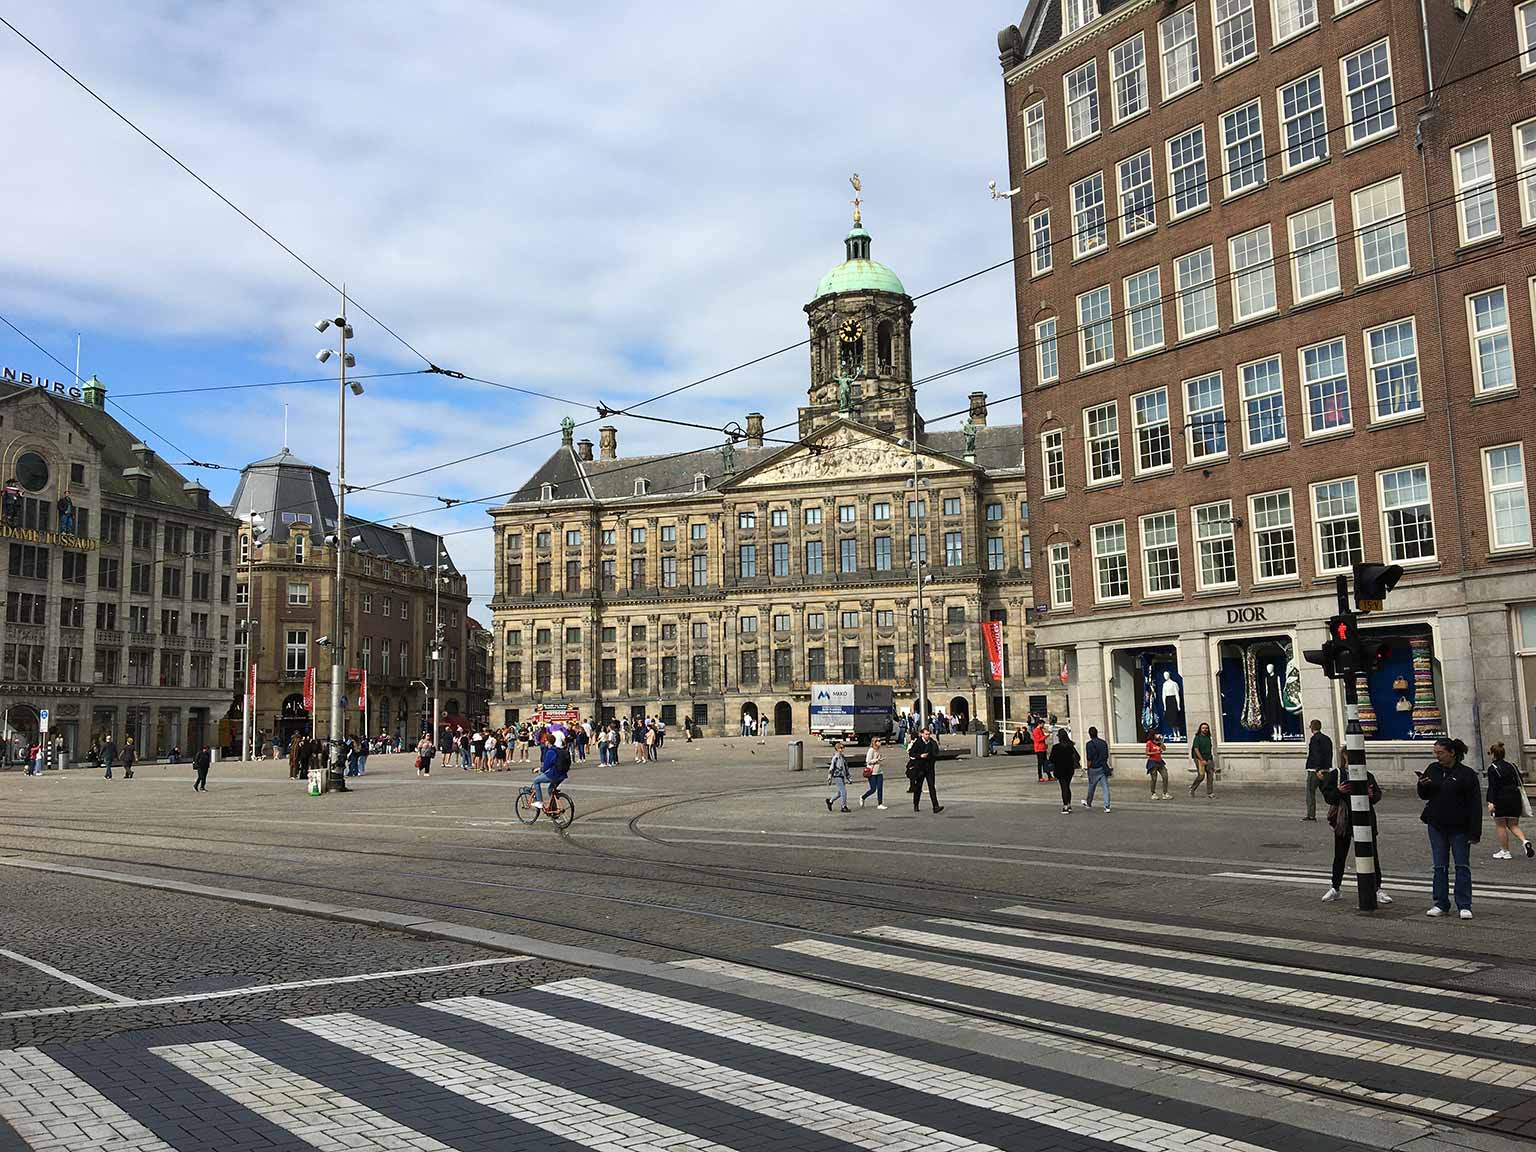 Looking from Damrak to Dam square, Amsterdam, Damrak 100 on the right